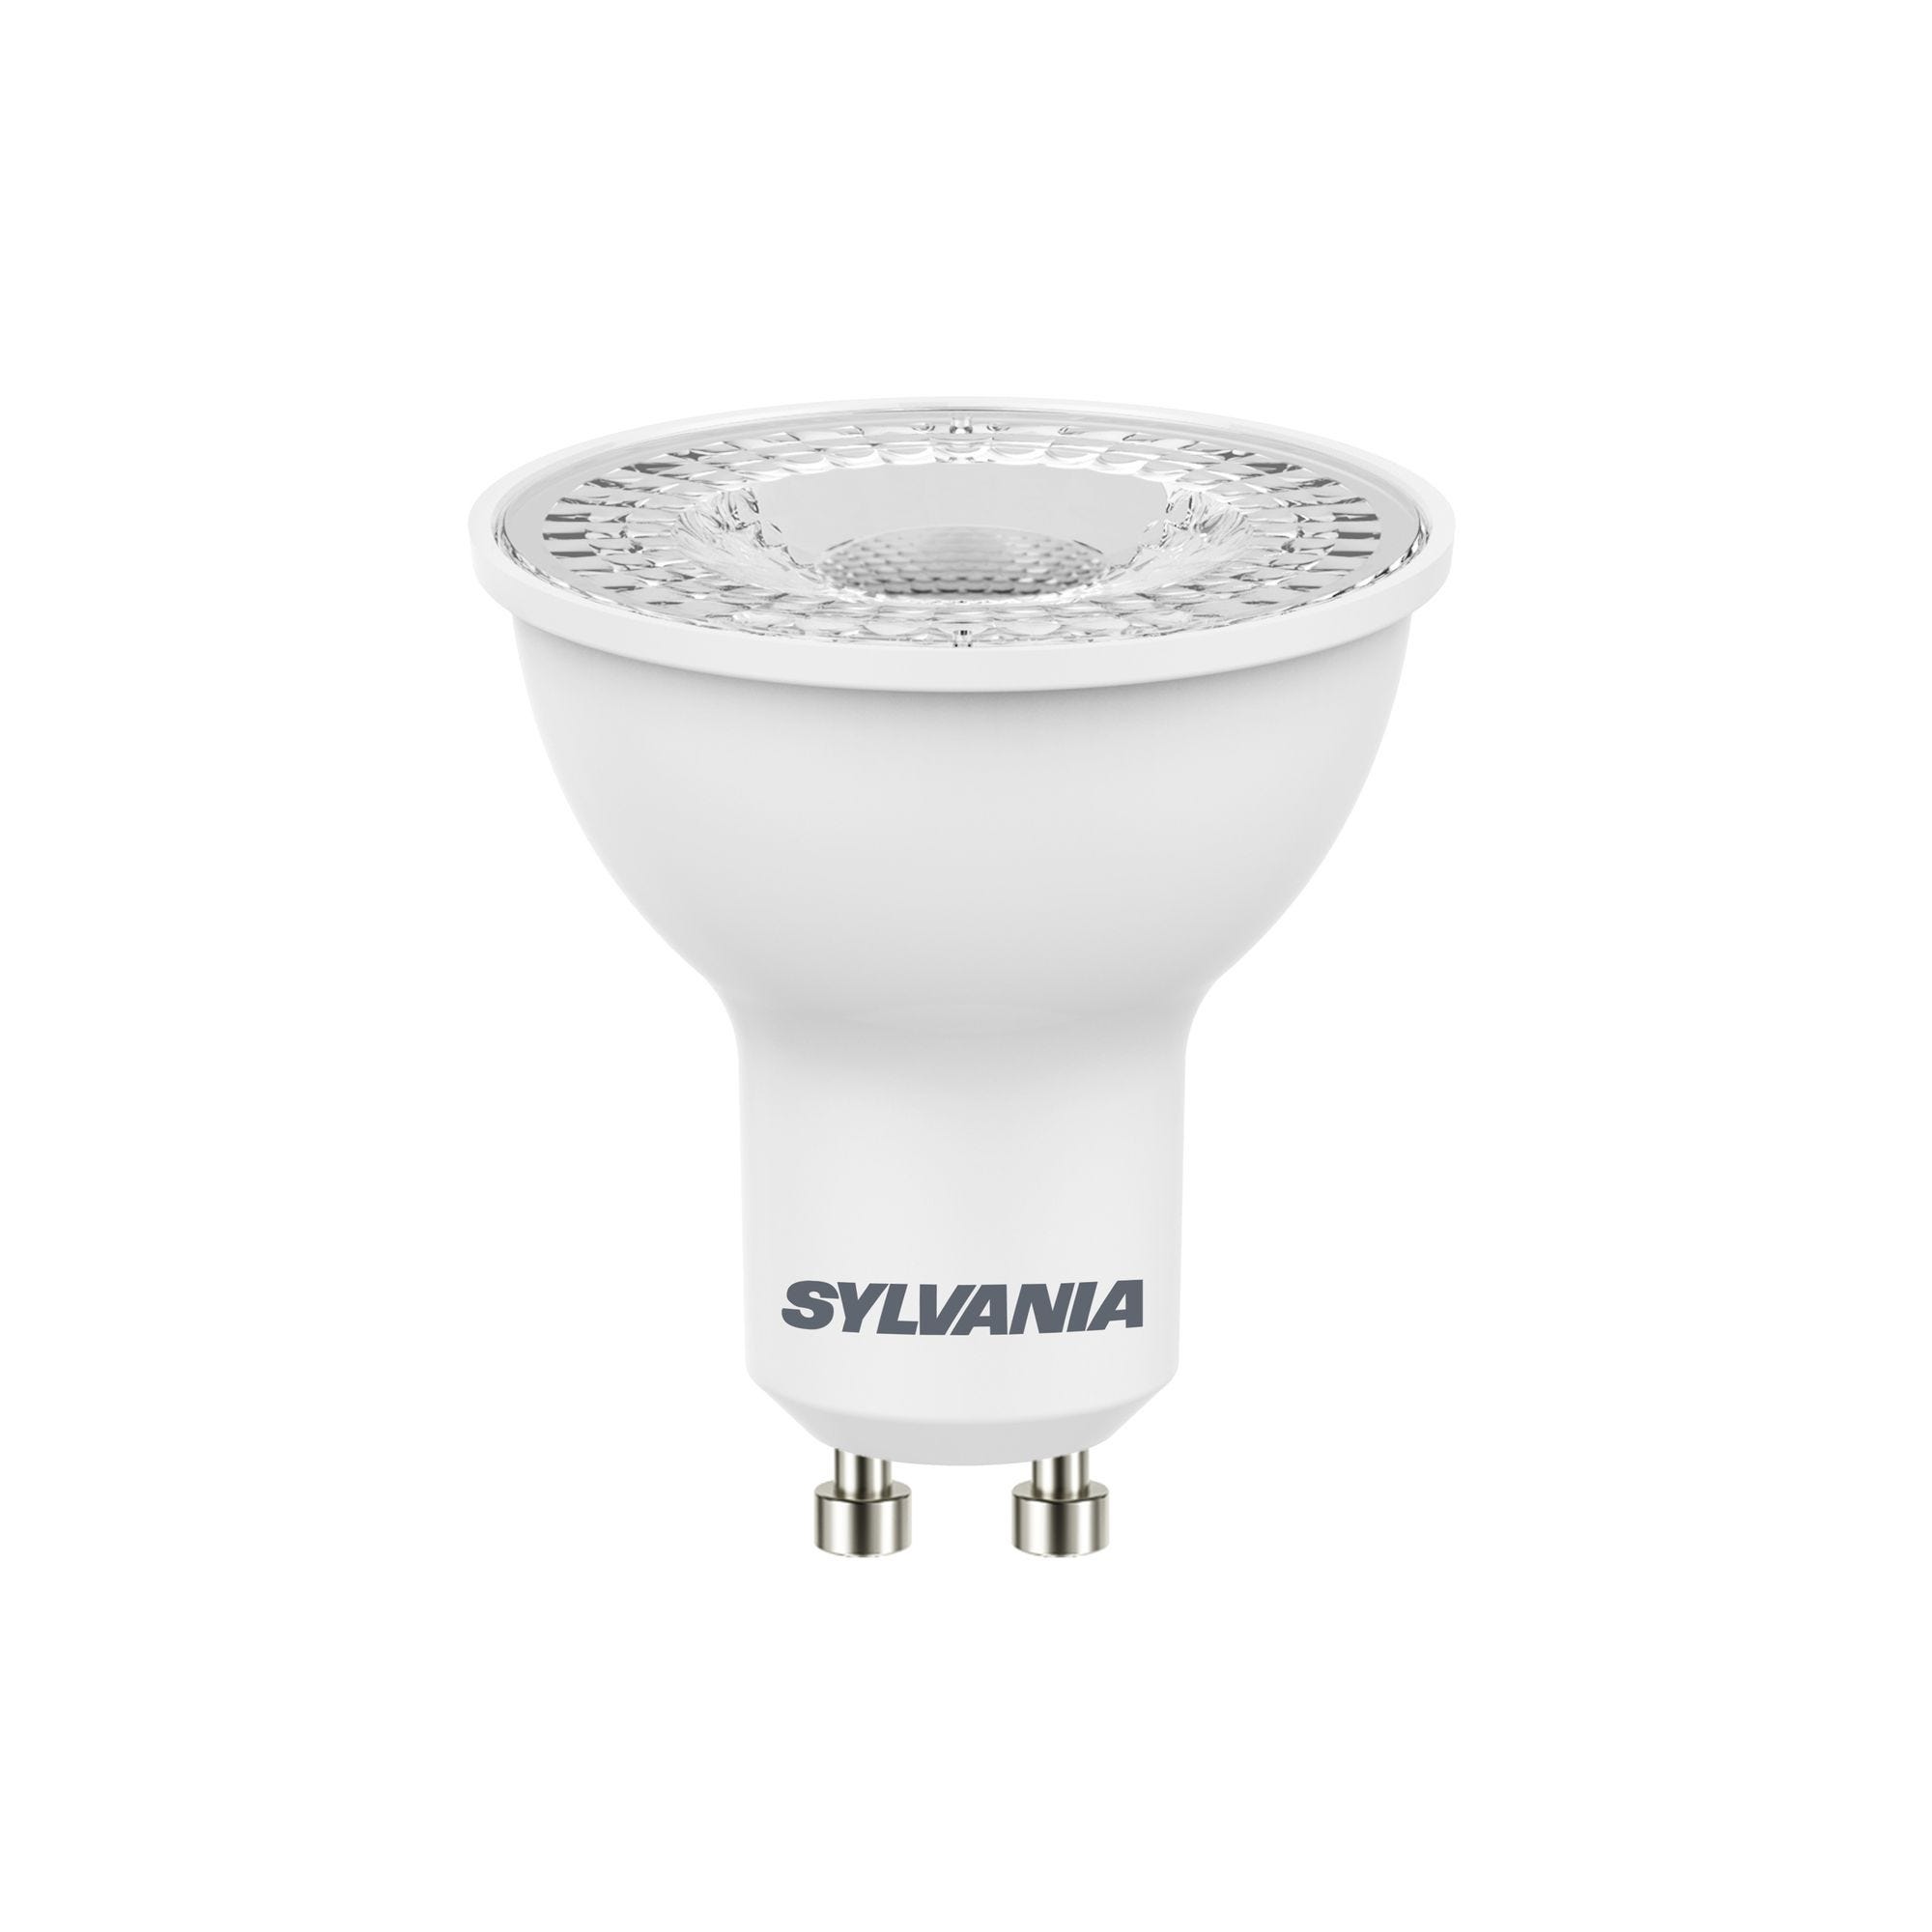 Lampe REFLED ES50 IRC 80 GU10 36° V2 450lm 840 dimmable - SYLVANIA - 0028556 1